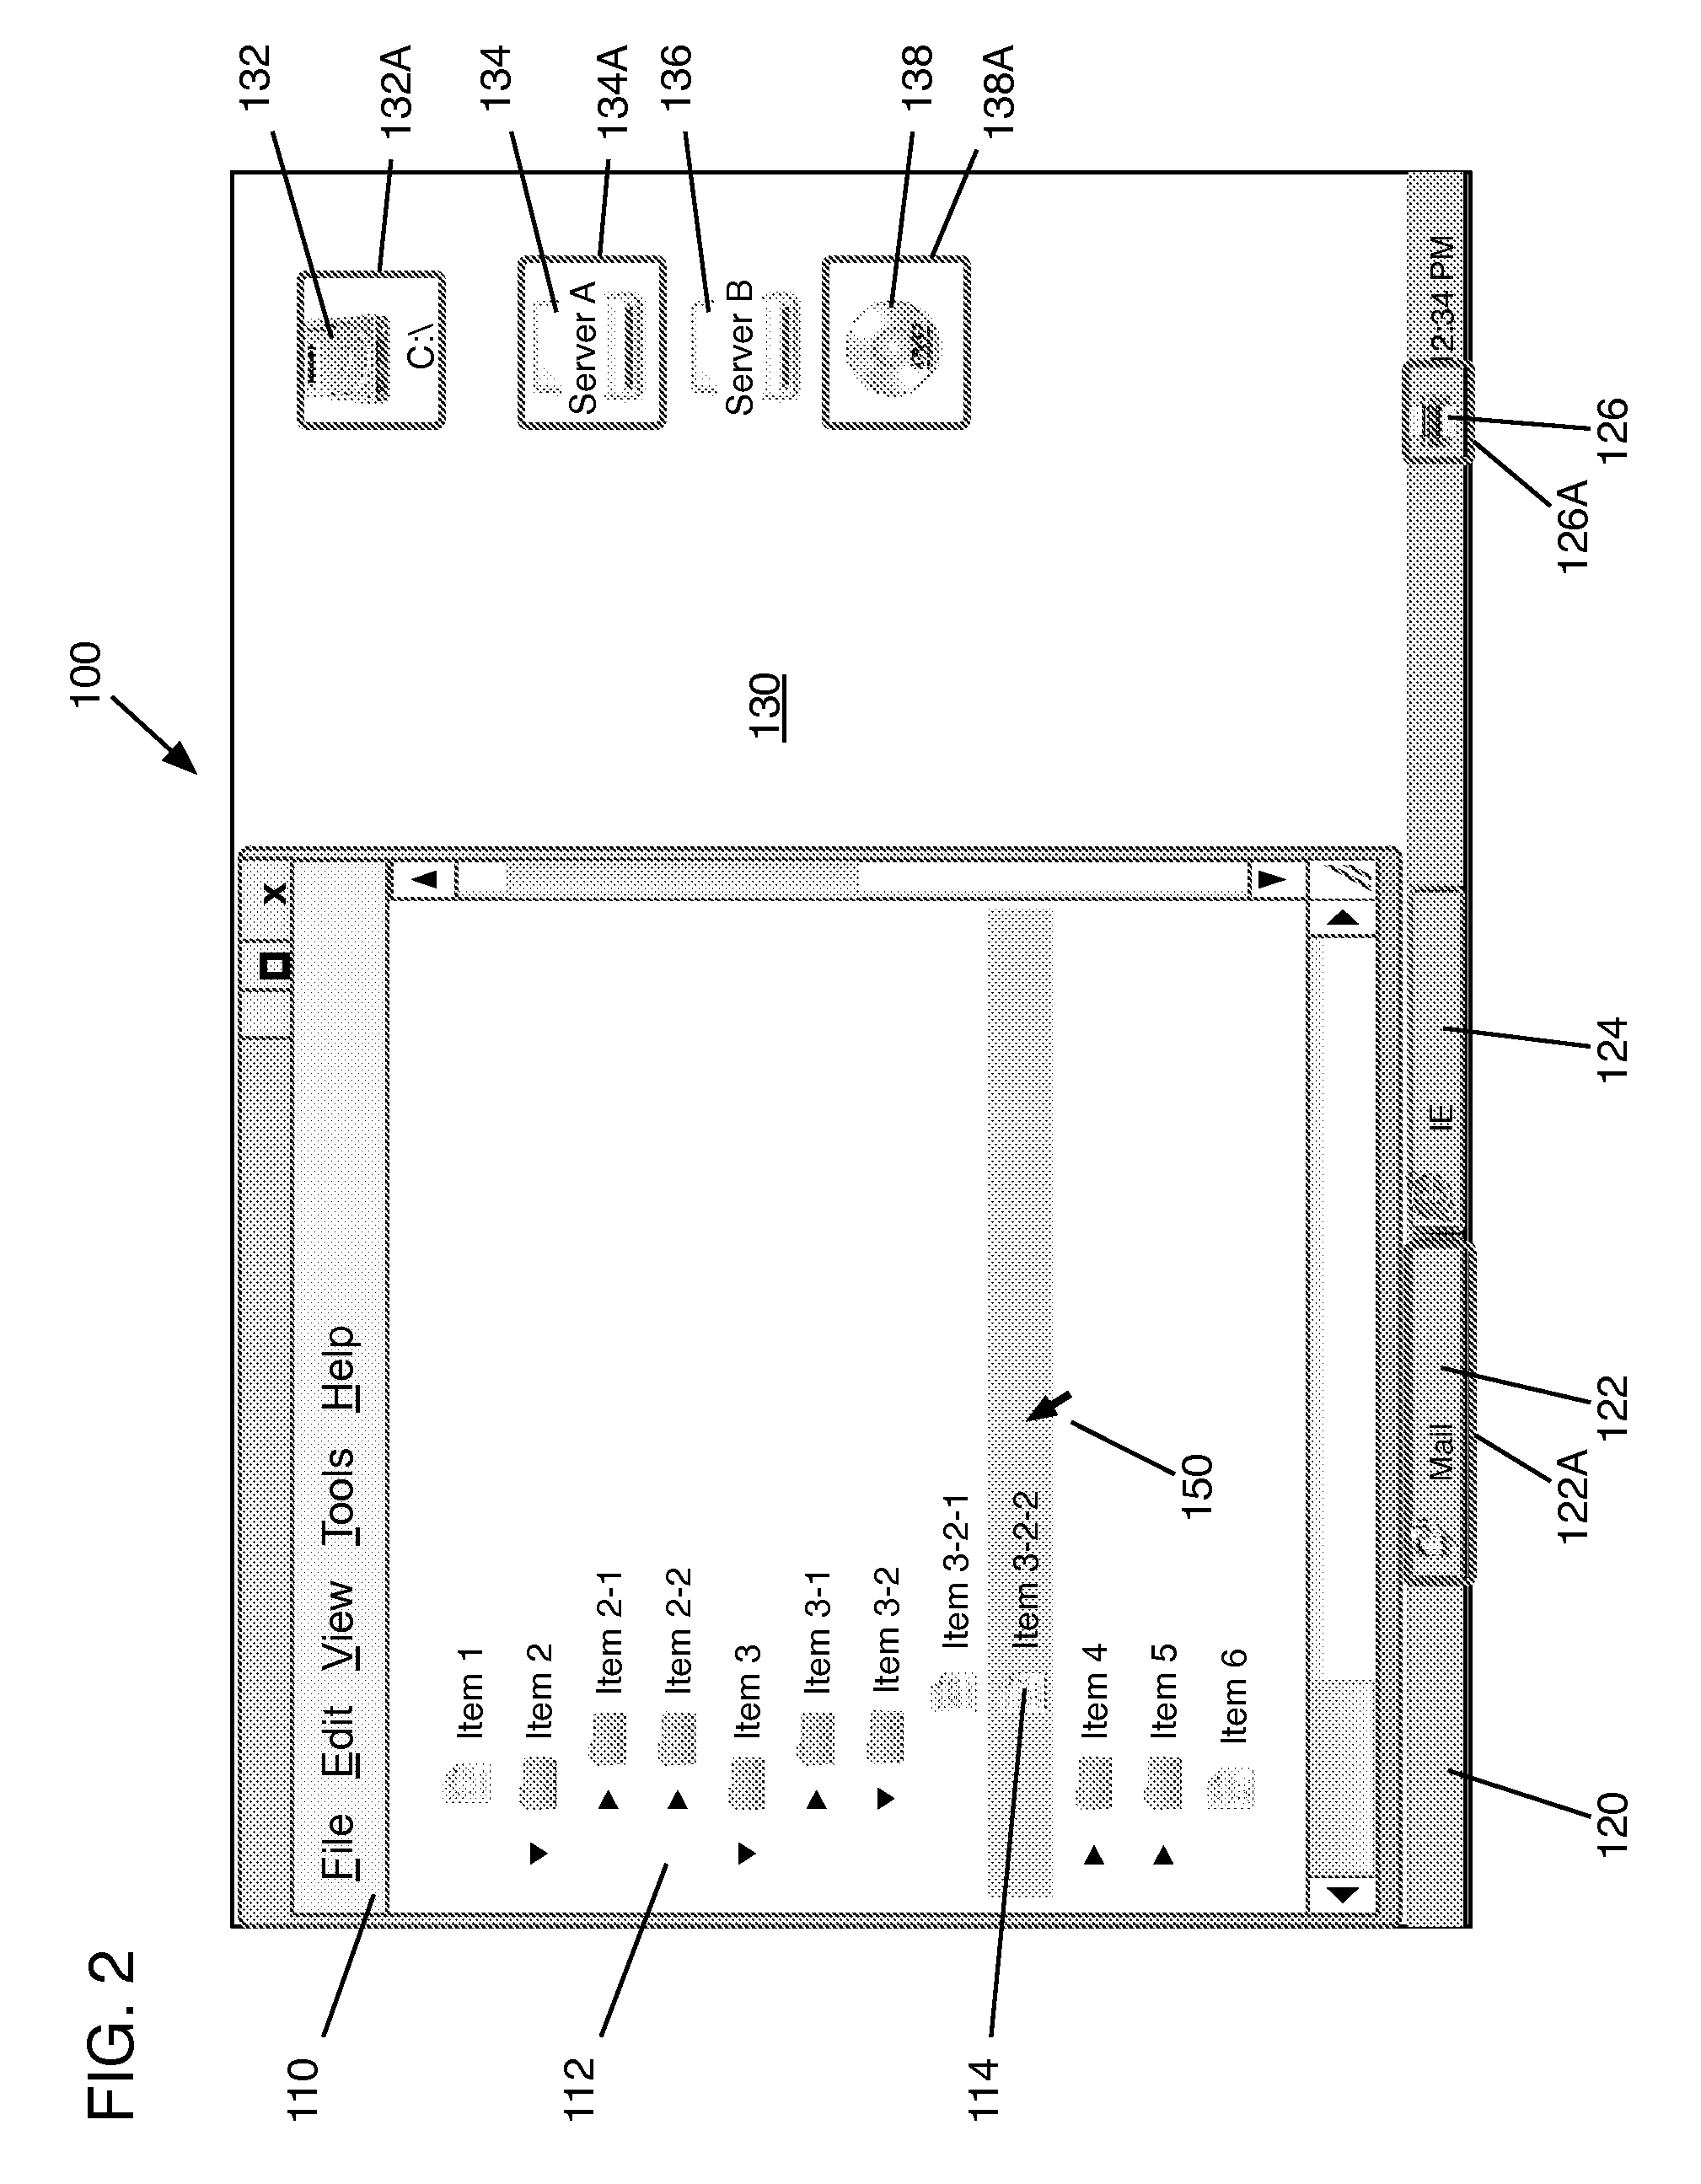 Drag and drop target indication in a graphical user interface